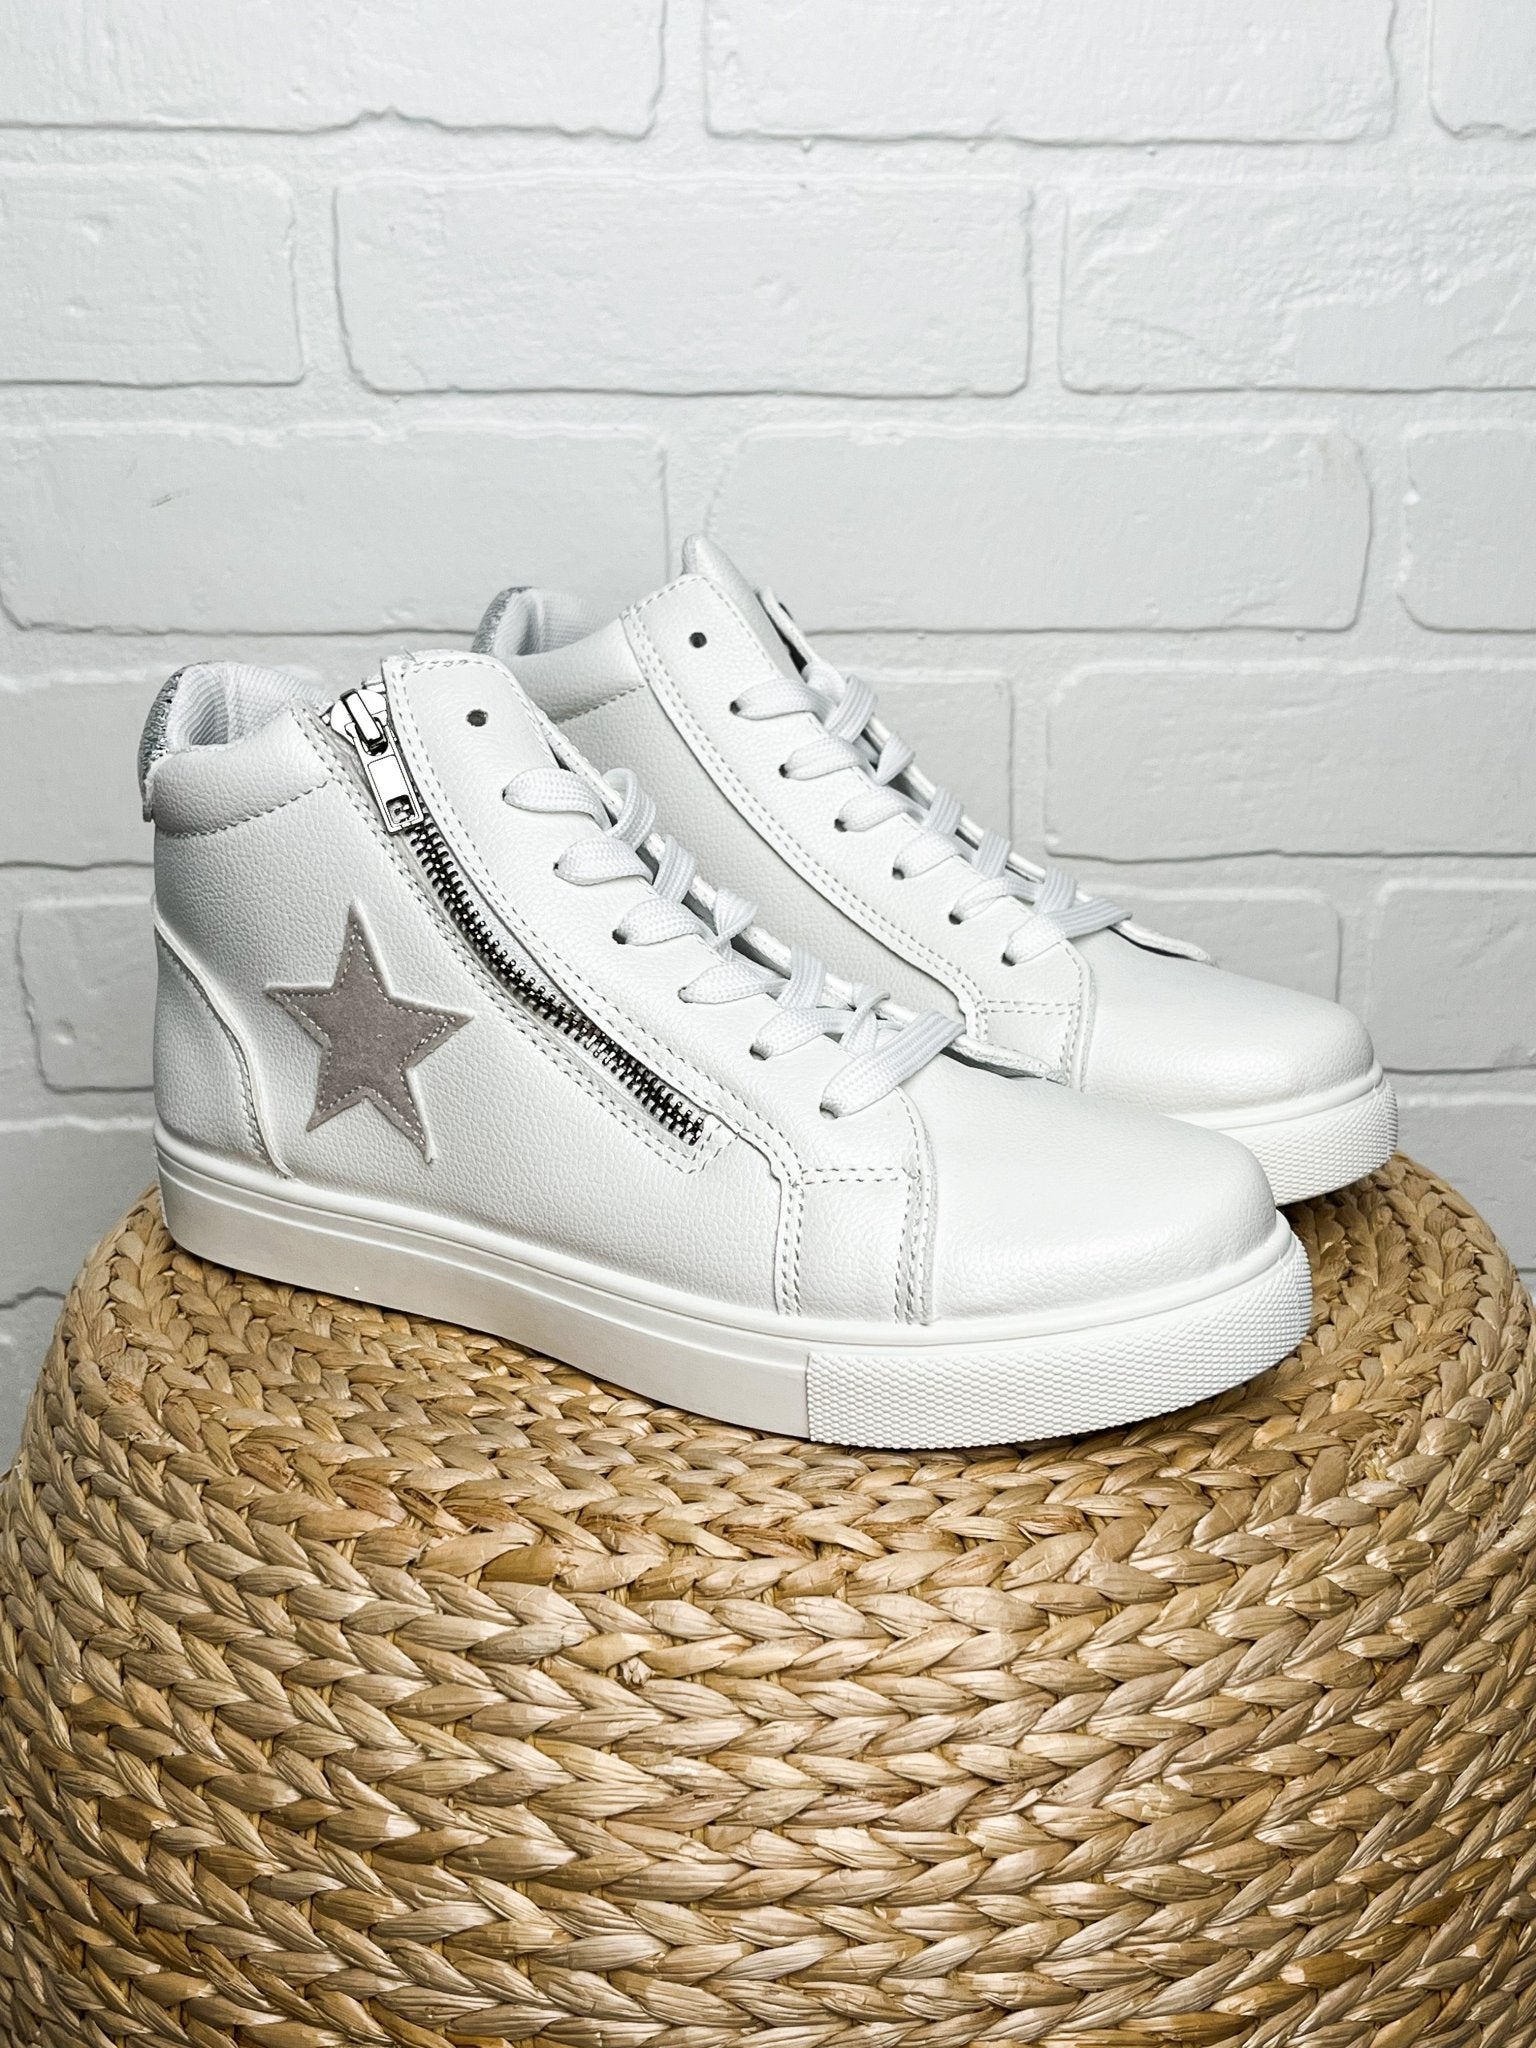 Fast star zip sneakers white - Trendy Shoes - Fashion Shoes at Lush Fashion Lounge Boutique in Oklahoma City